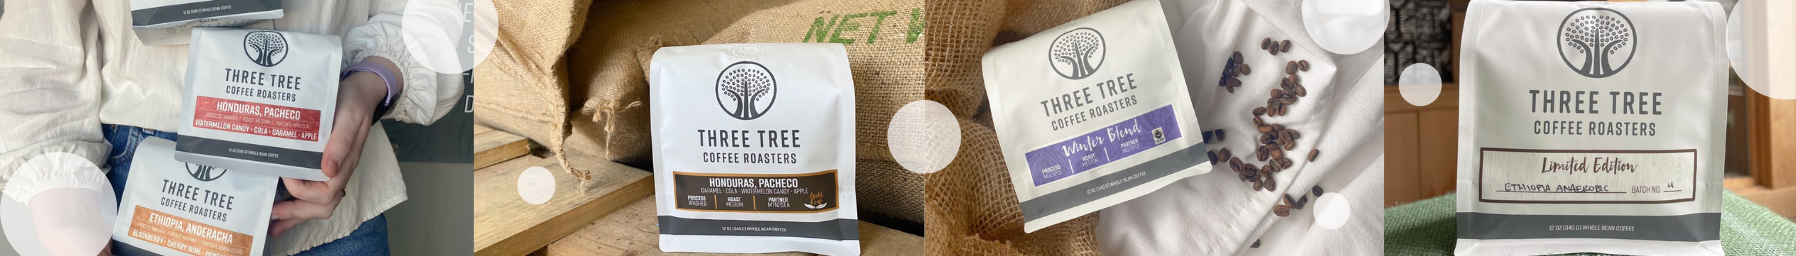 Three Tree Coffee - New supplier on Syncee Marketplace